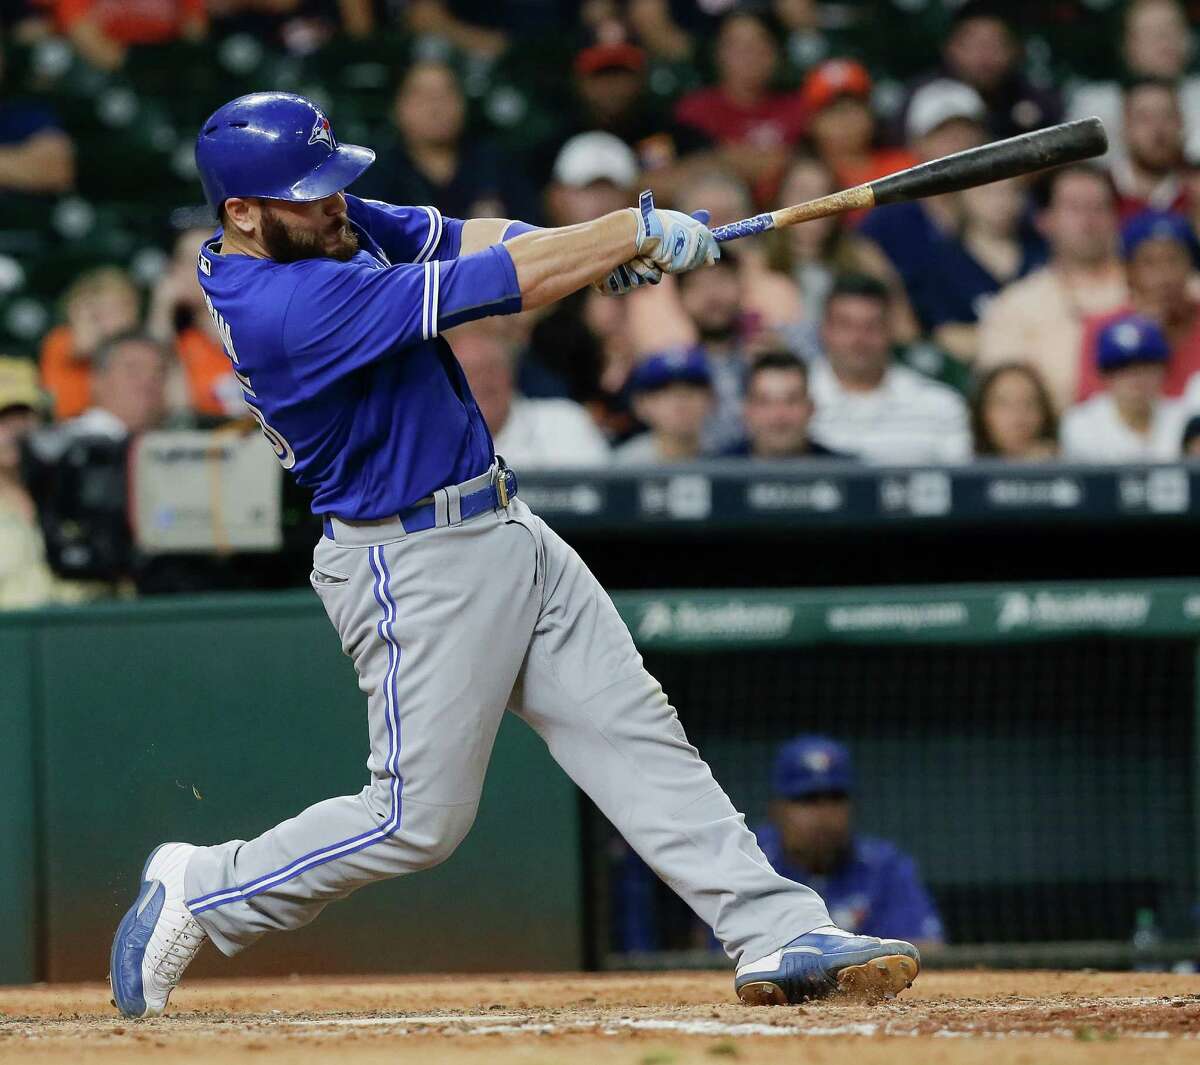 HOUSTON, TX - AUGUST 01: Russell Martin #55 of the Toronto Blue Jays hits a home run in the ninth inning against the Houston Astros at Minute Maid Park on August 1, 2016 in Houston, Texas. (Photo by Bob Levey/Getty Images)